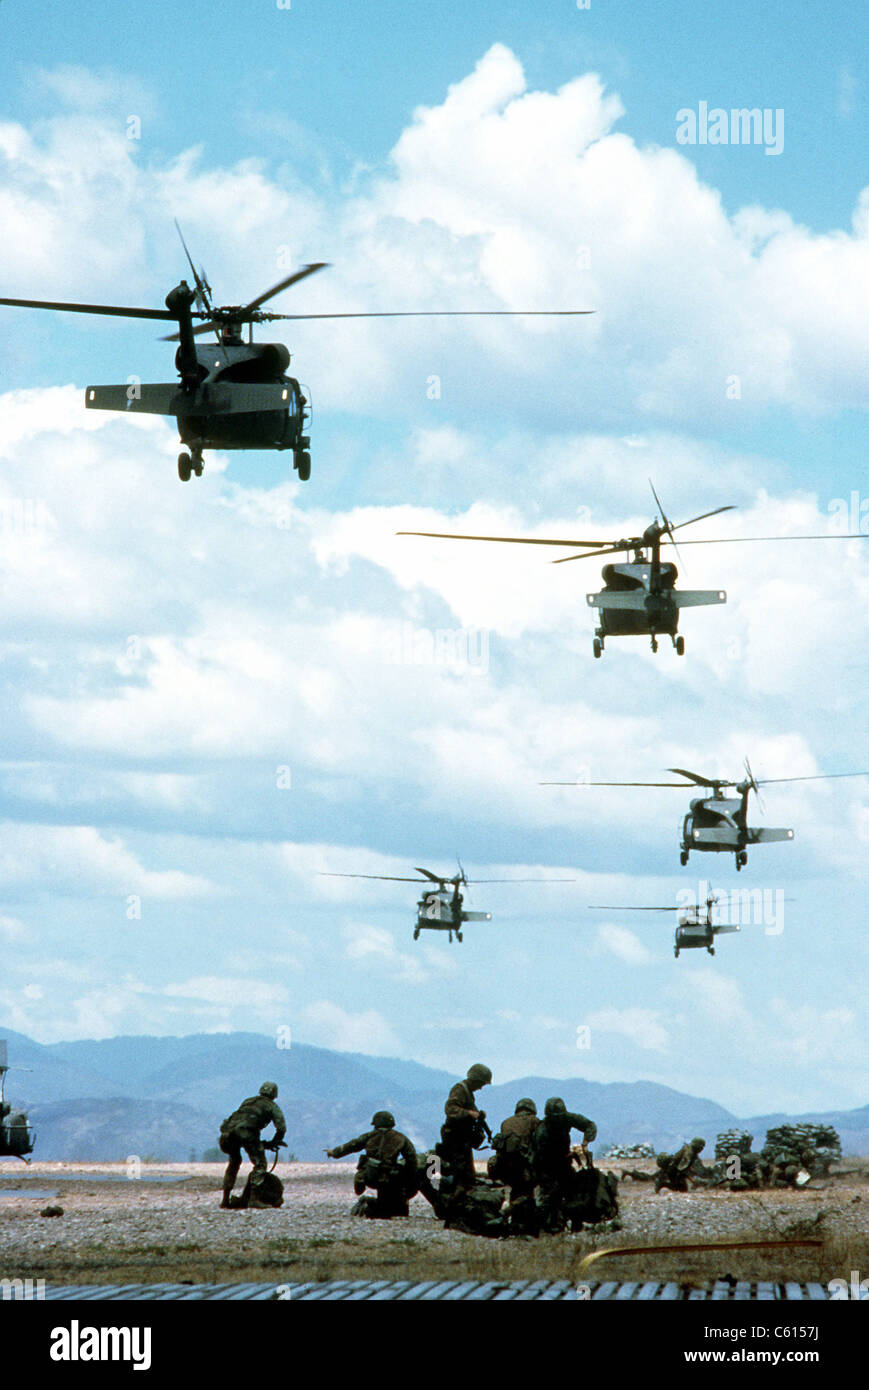 Army Rangers are inserted by Black Hawk helicopters into Honduras during exercises to discourage Nicaraguan forces from entering Honduras. Mar. 1 1988., Photo by:Everett Collection(BSLOC 2011 6 126) Stock Photo